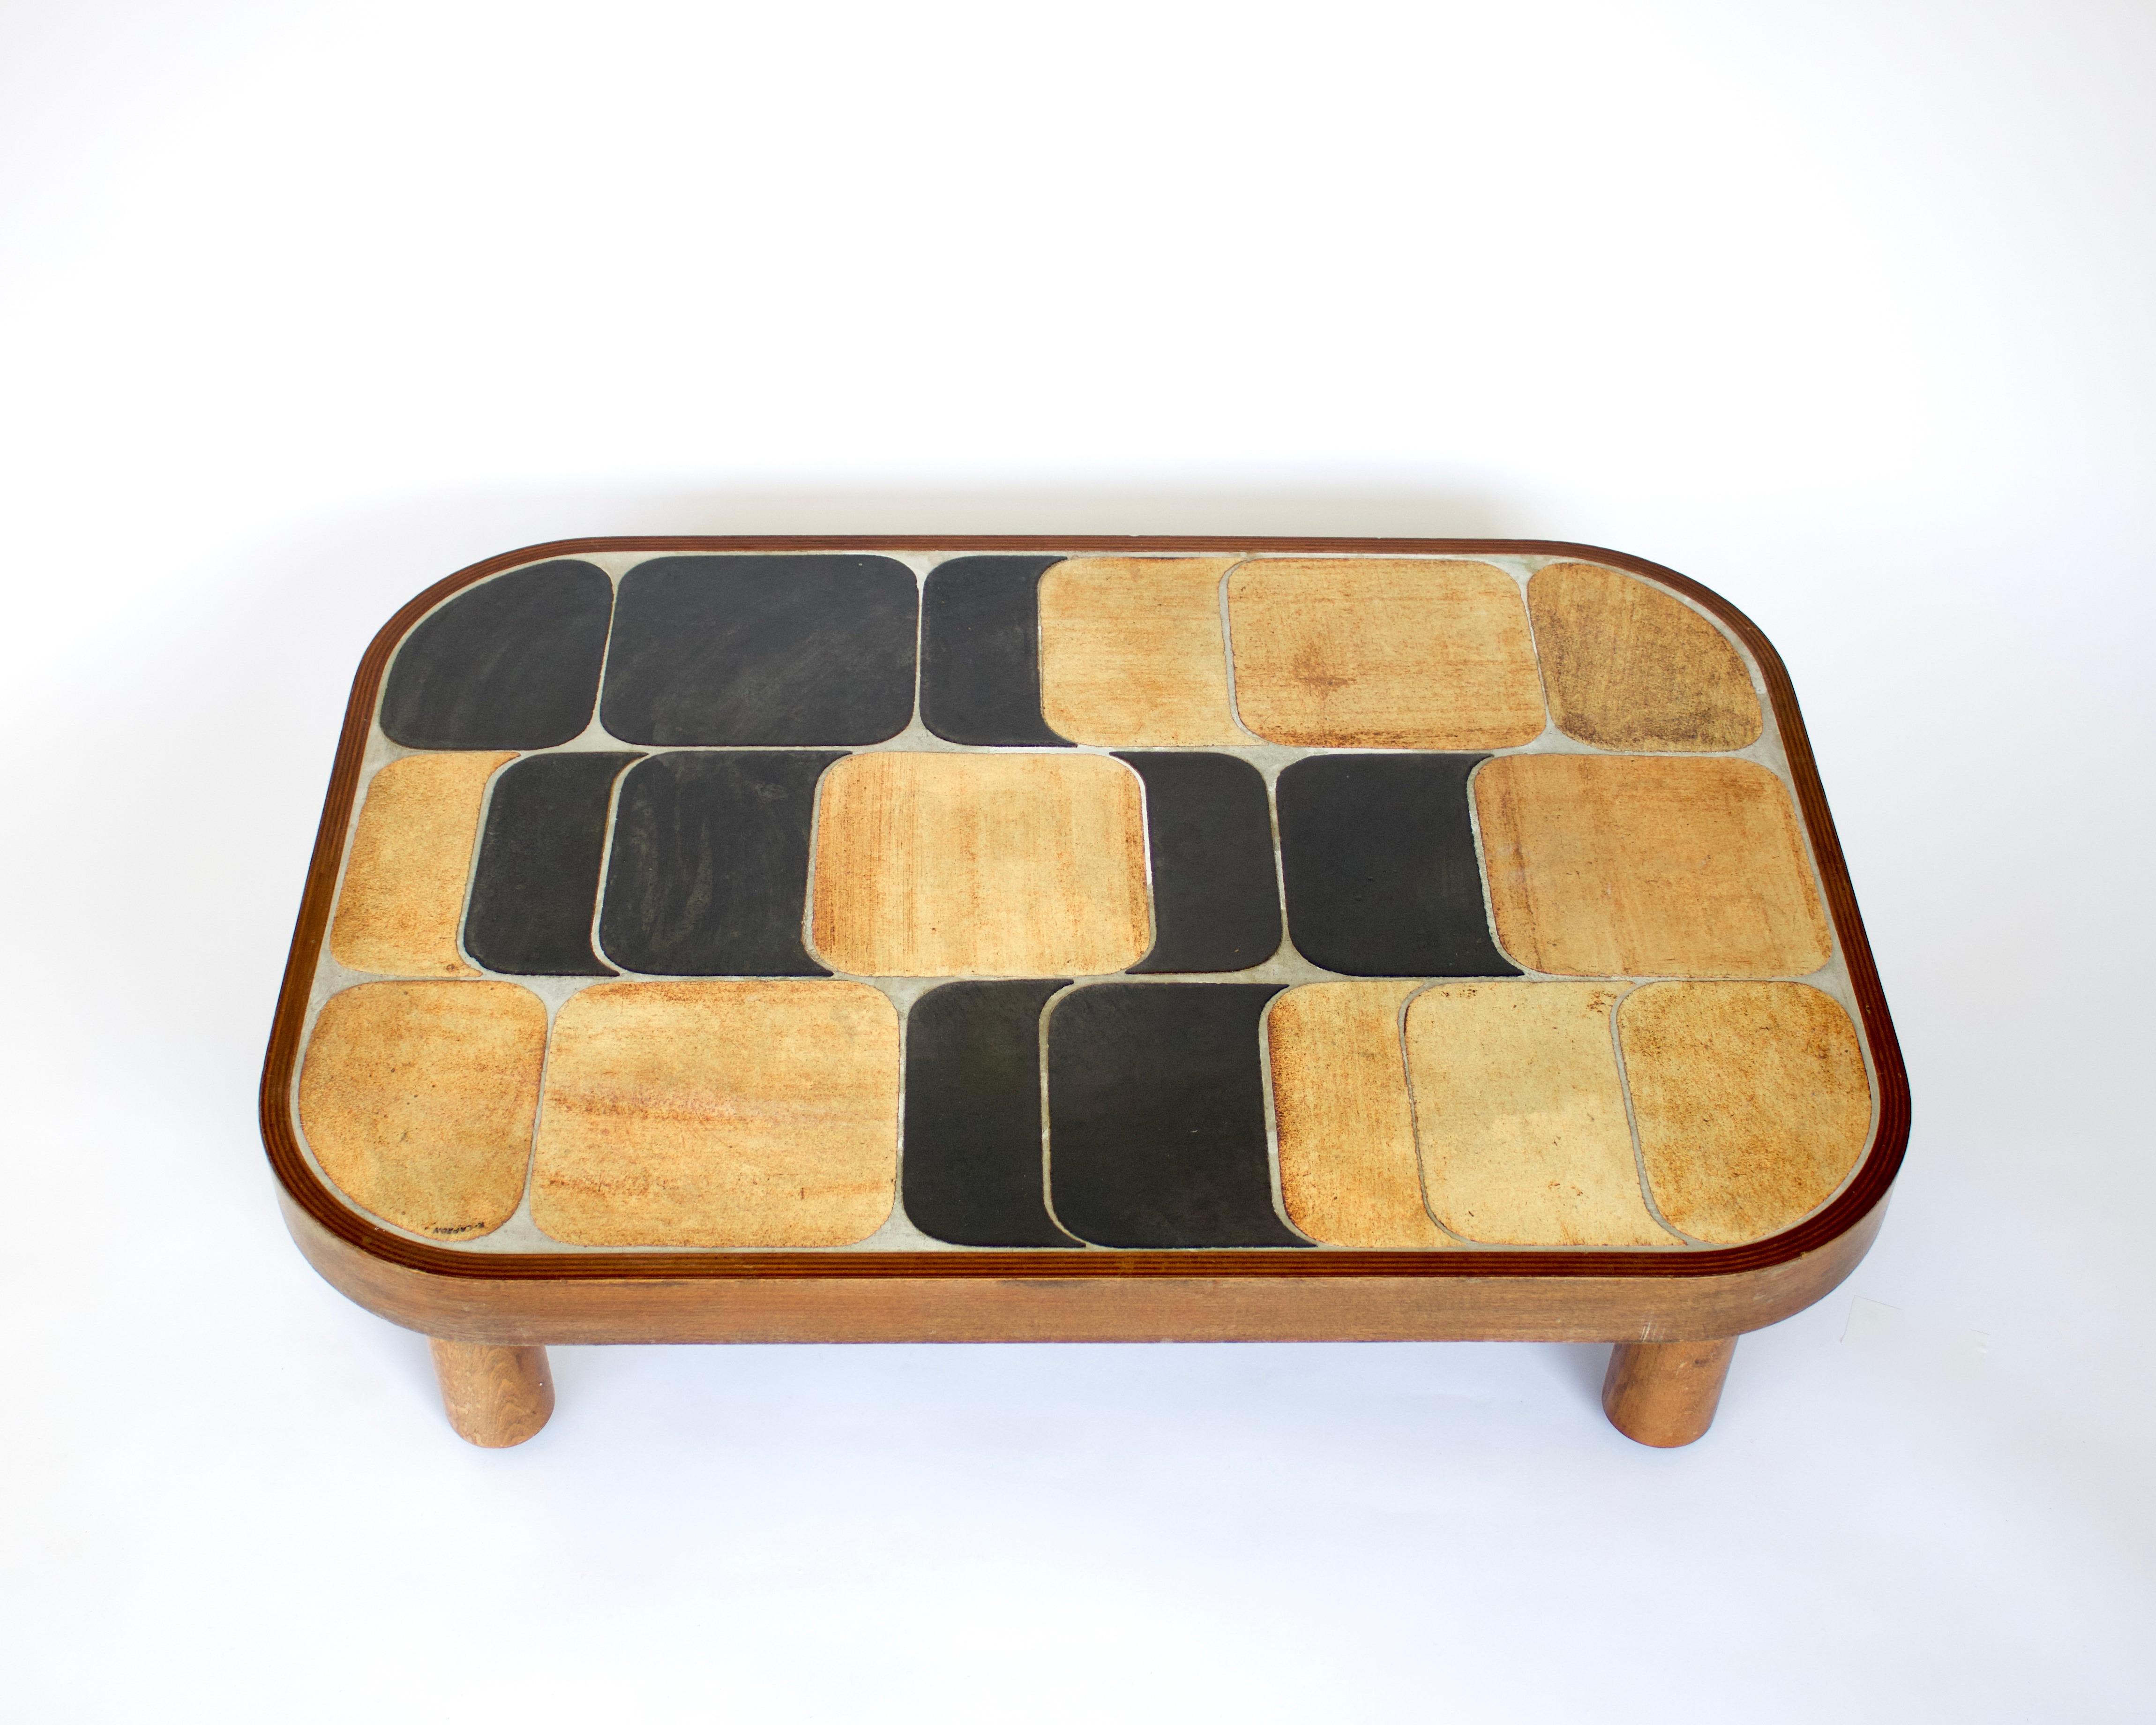 Roger Capron Sho-Gun or Shogun model coffee table with ceramic tile top with beige brown enameled tiles on mahogany base and feet. Signed R Capron.
The colors vary from table to table as a result of the temperature of the firing in the kiln. No